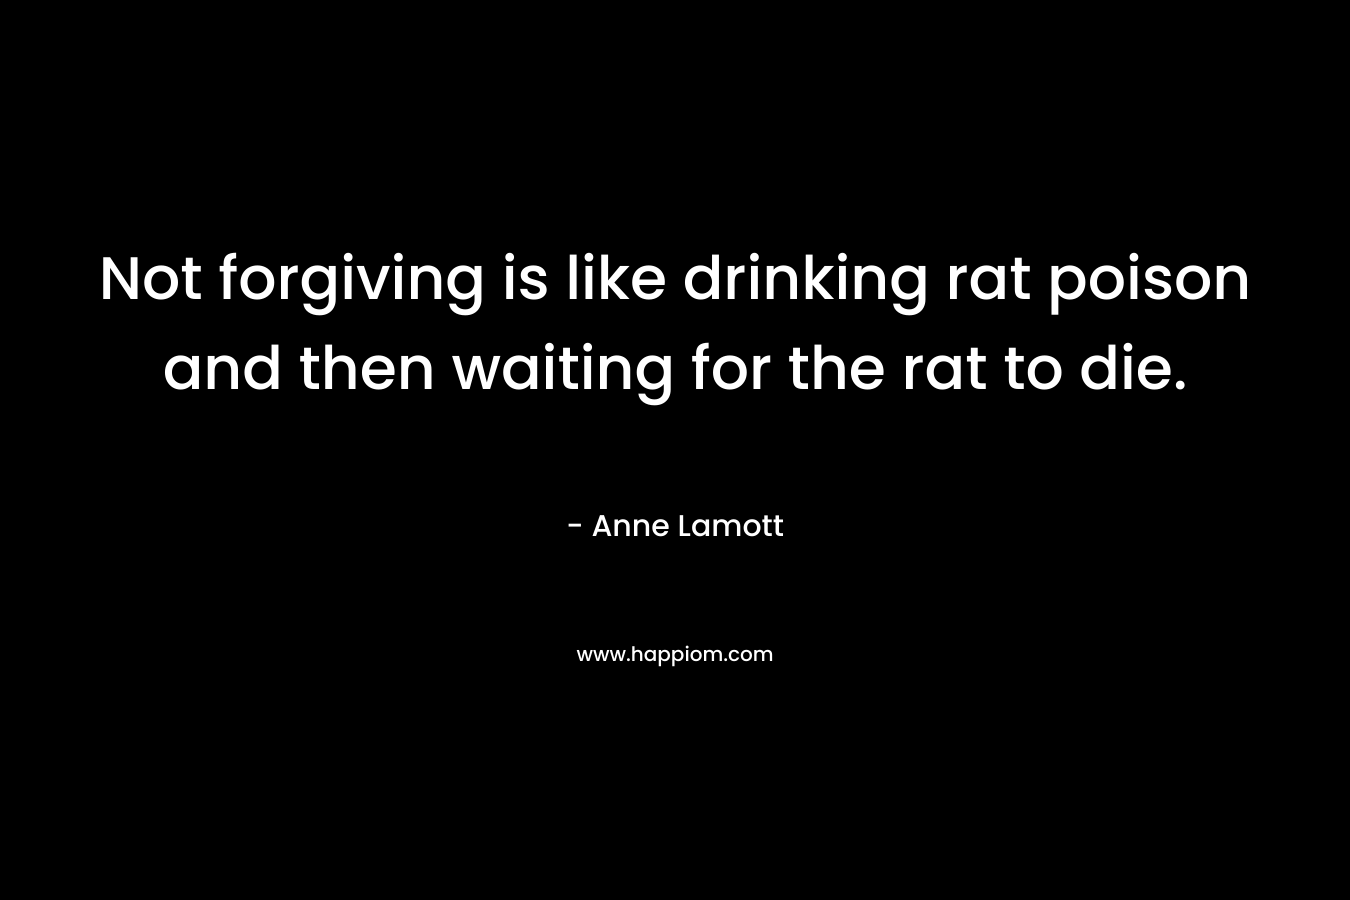 Not forgiving is like drinking rat poison and then waiting for the rat to die.